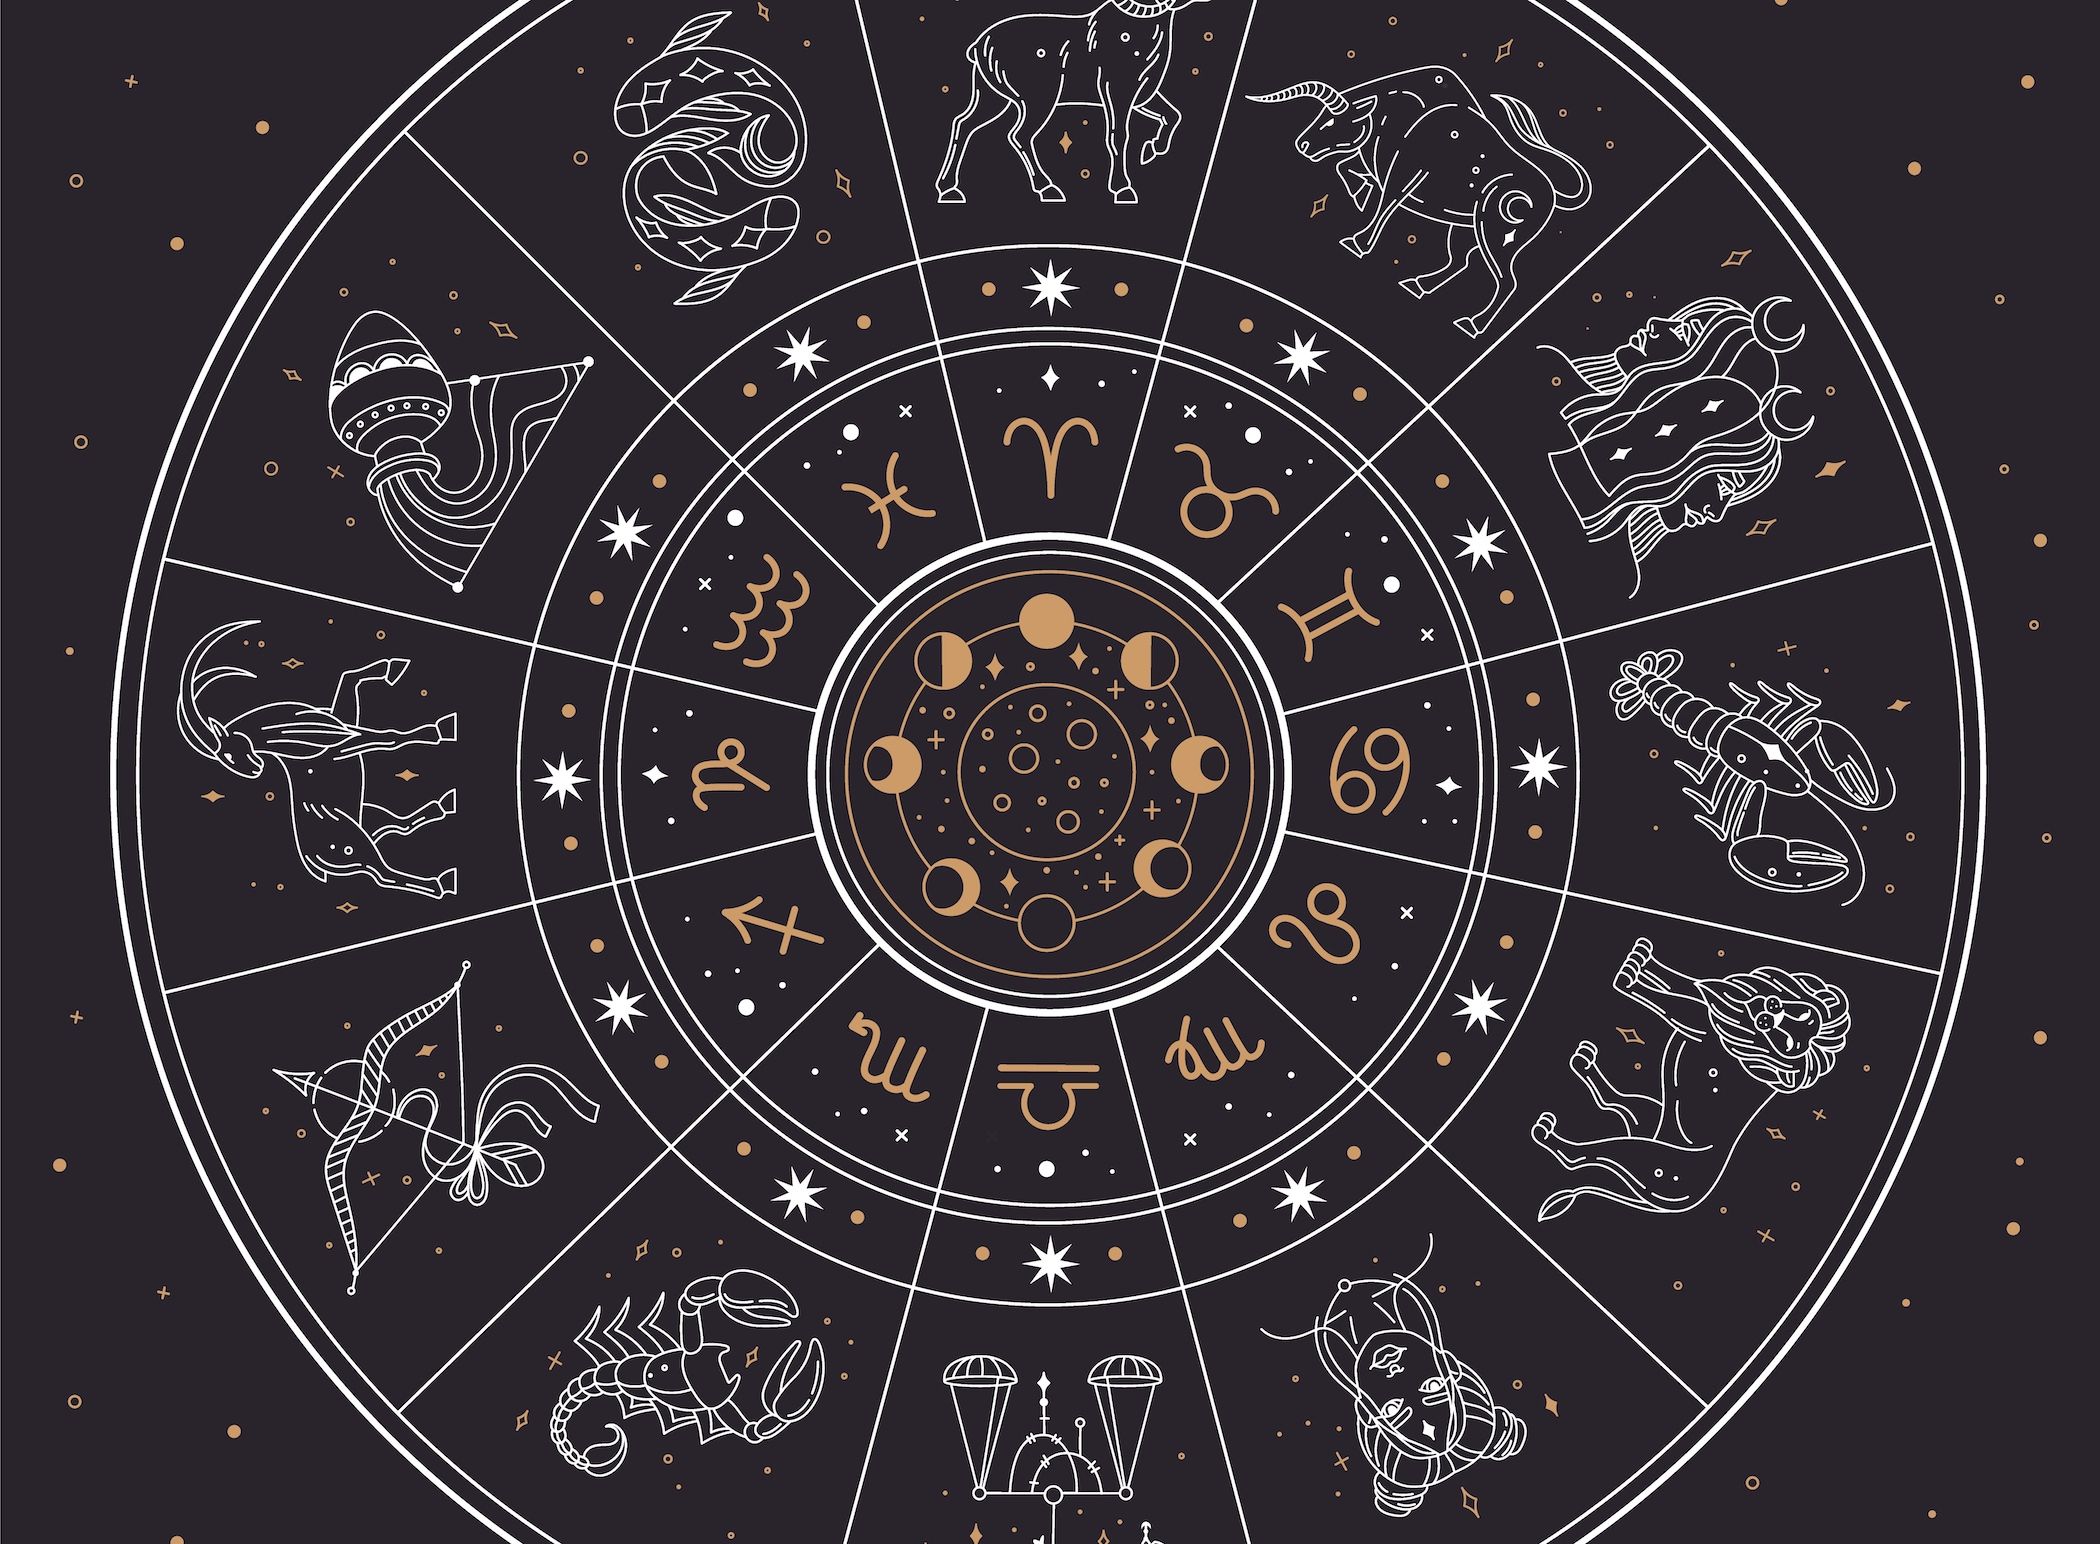 October horoscope: What does the transit of planets mean for all signs?